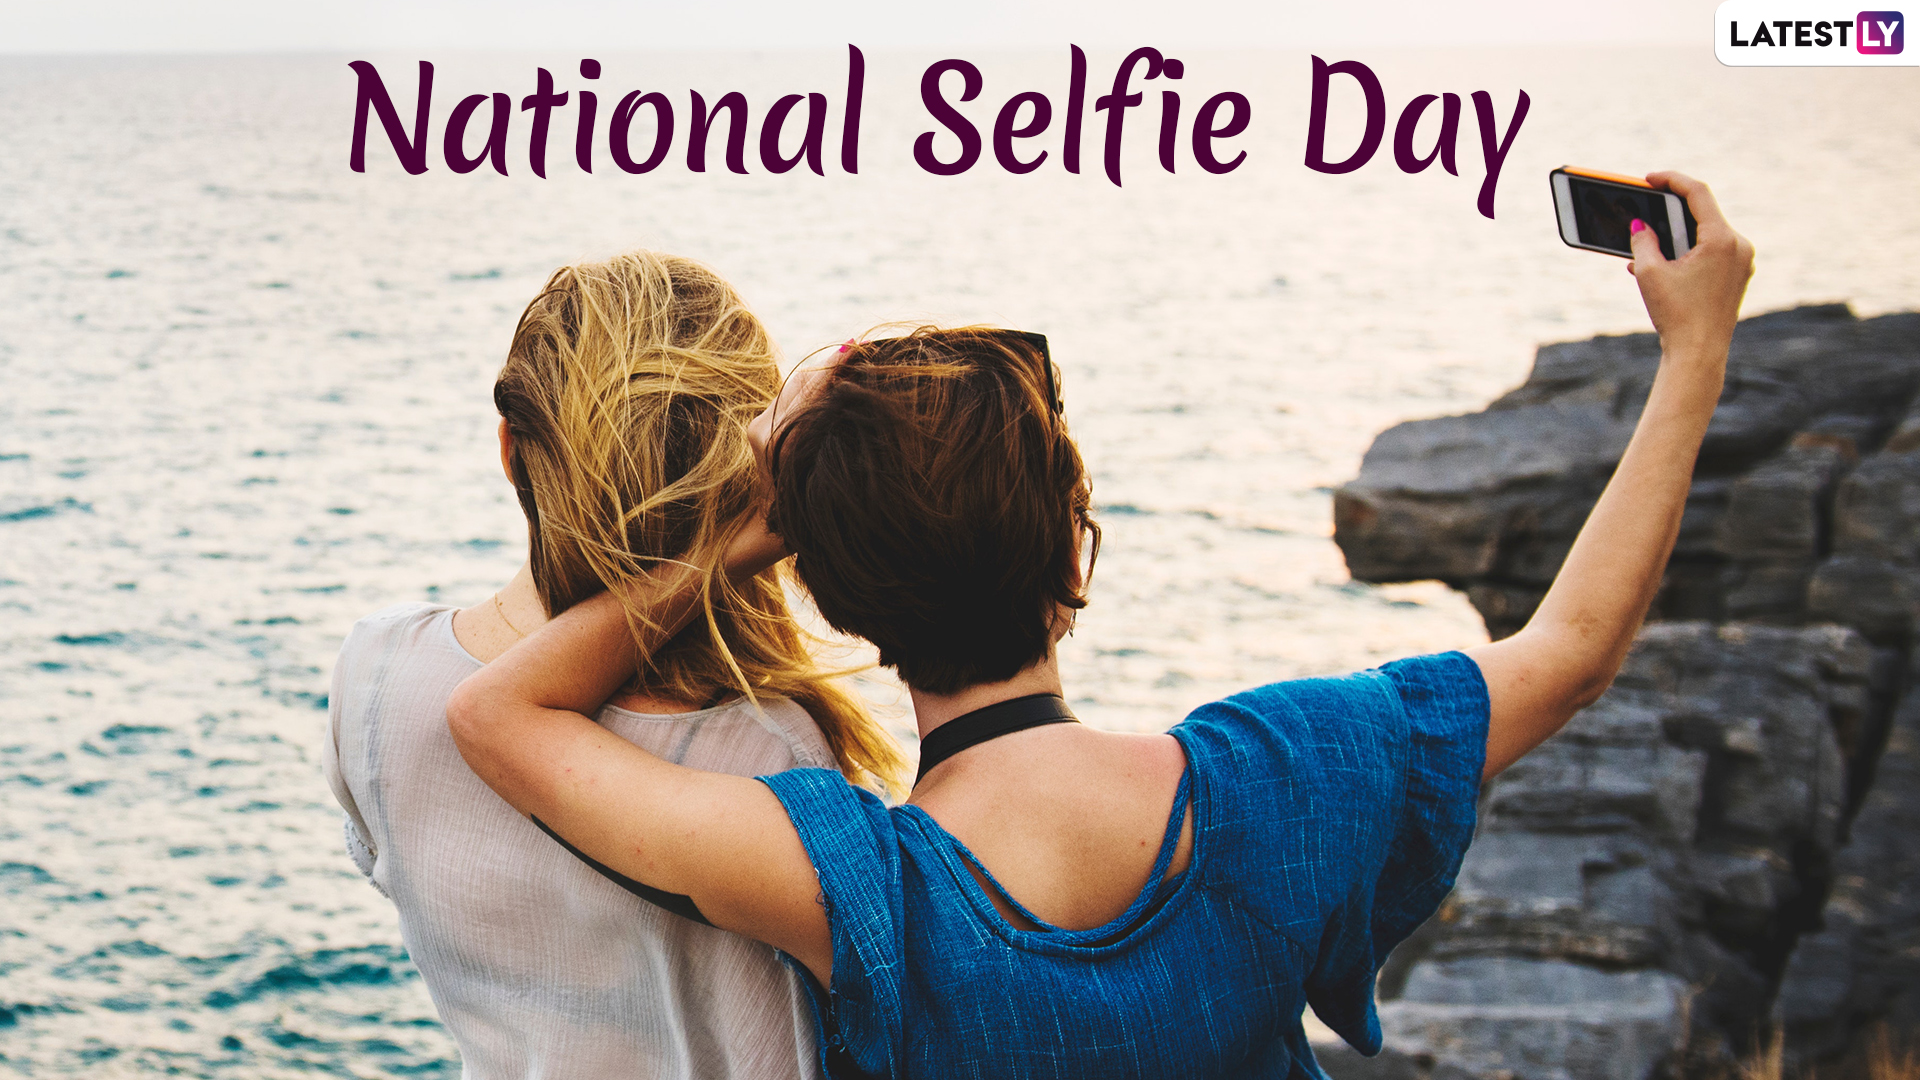 Festivals & Events News Fascinating Facts About selfies To Post On